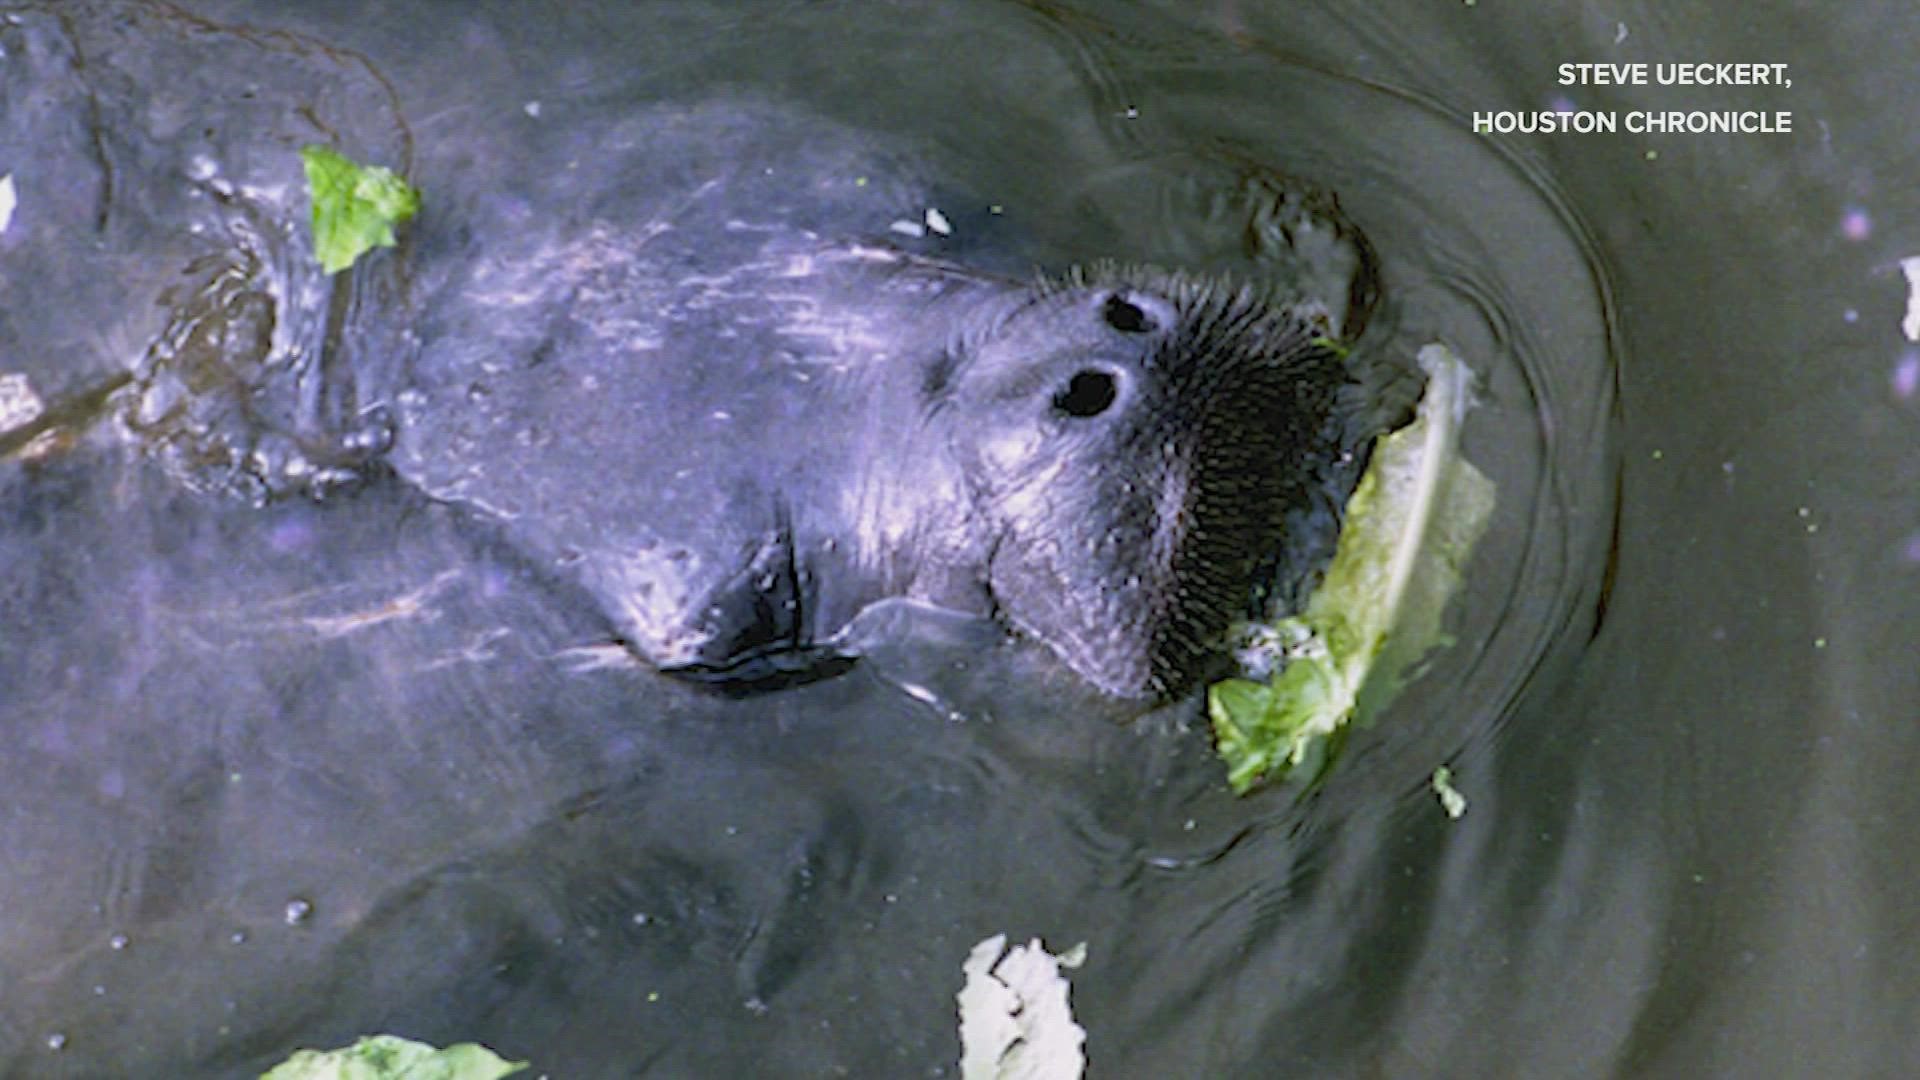 Alligators are pretty common. But otters, not so much. Even in 1995, somehow a manatee swam it’s way up Buffalo Bayou.